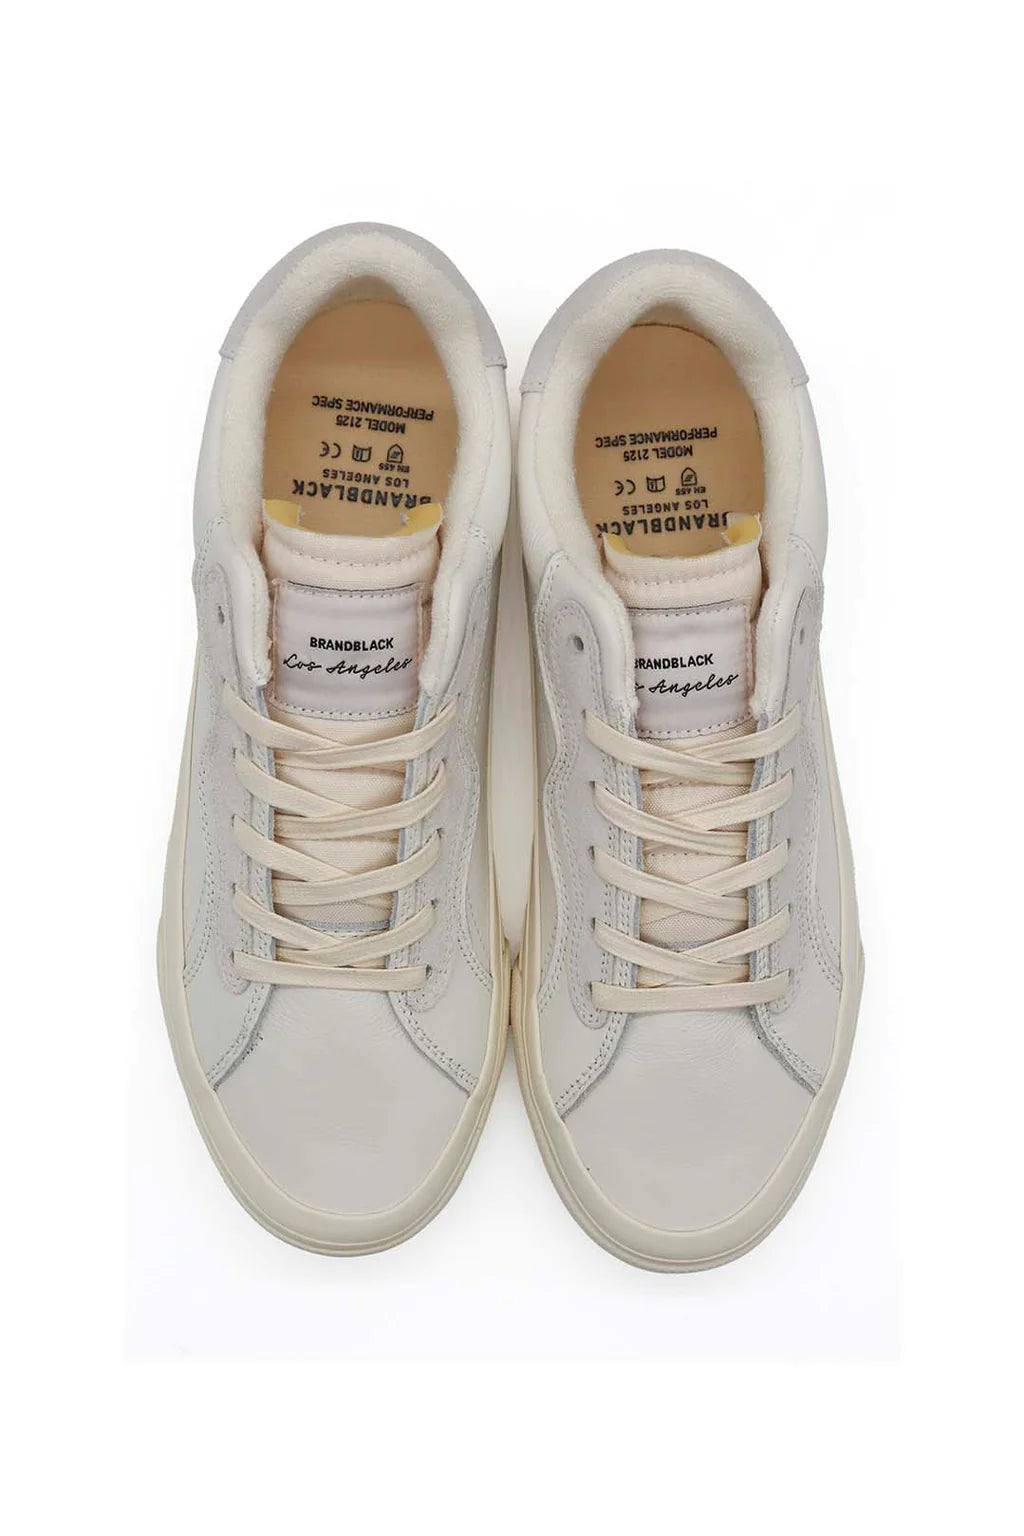 NO NAME LEATHER SNEAKER - OFF WHITE